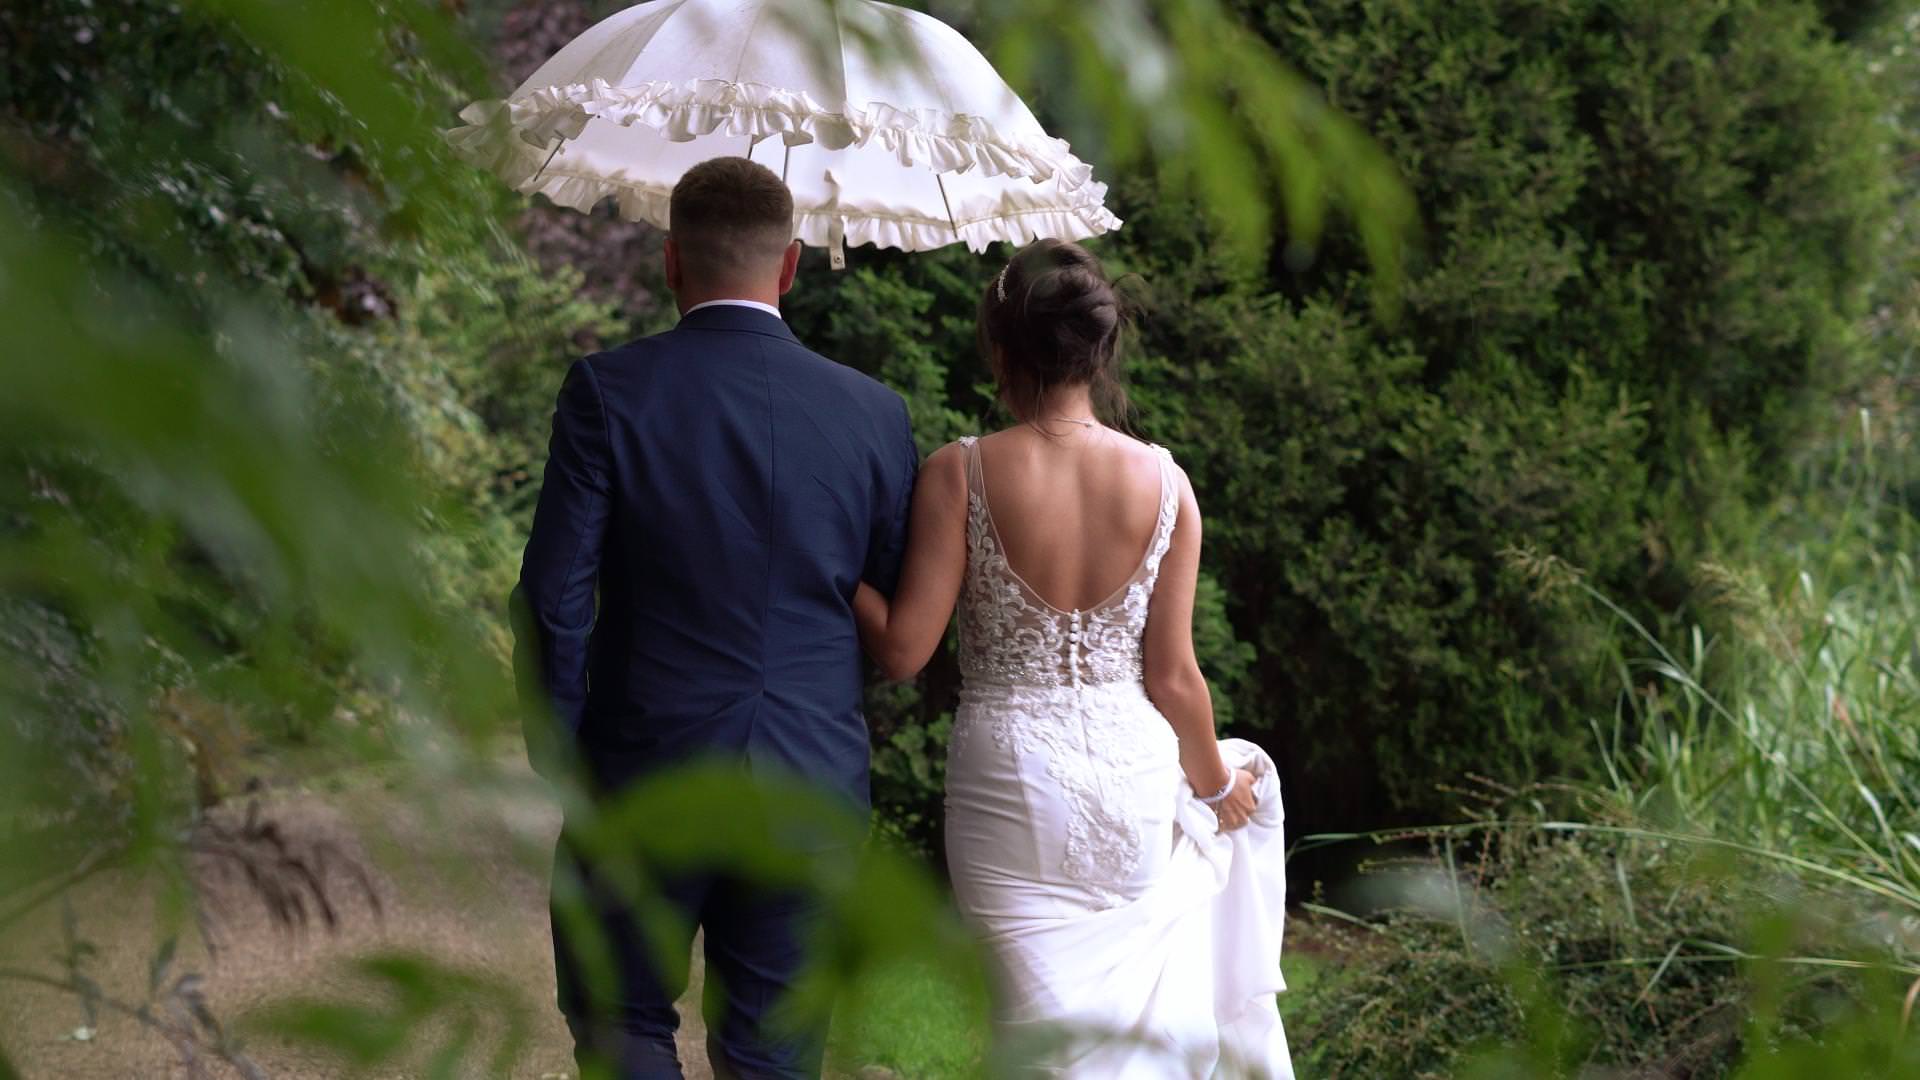 a bride and groom walk around the gardens at Moddershall Oaks holding a white umbrella